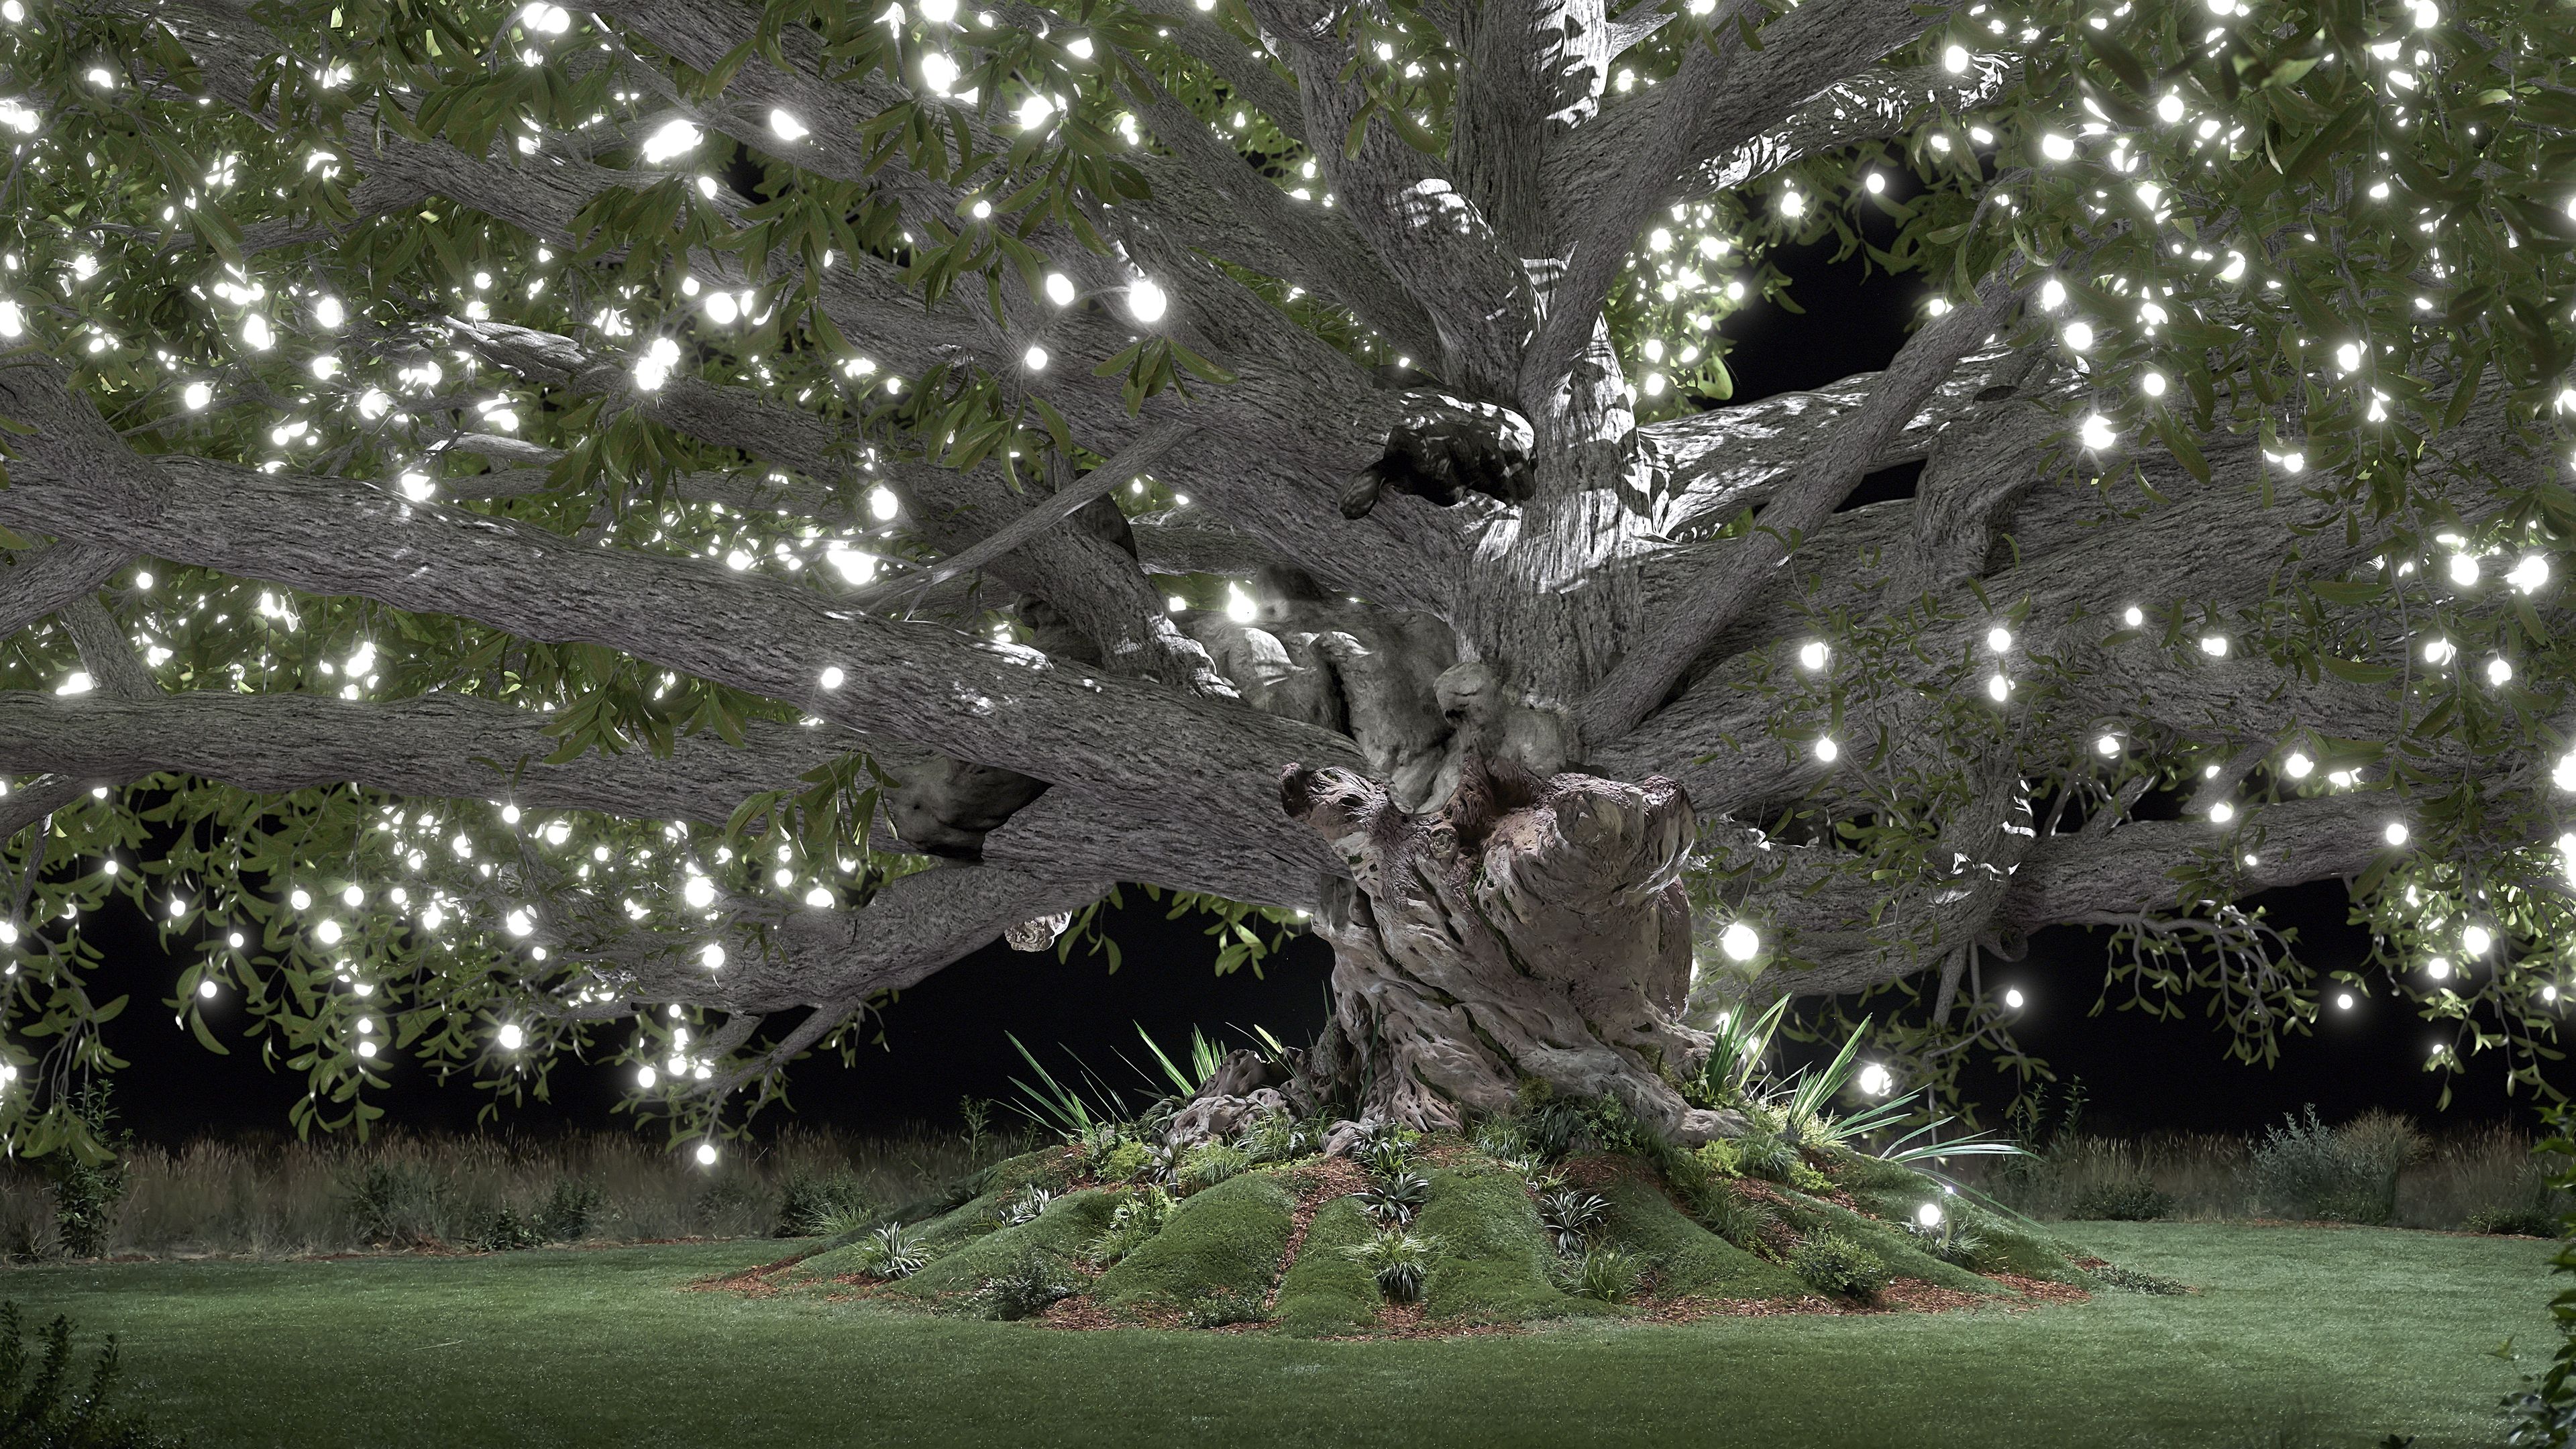 The tree of life appears in Lehi's vision.